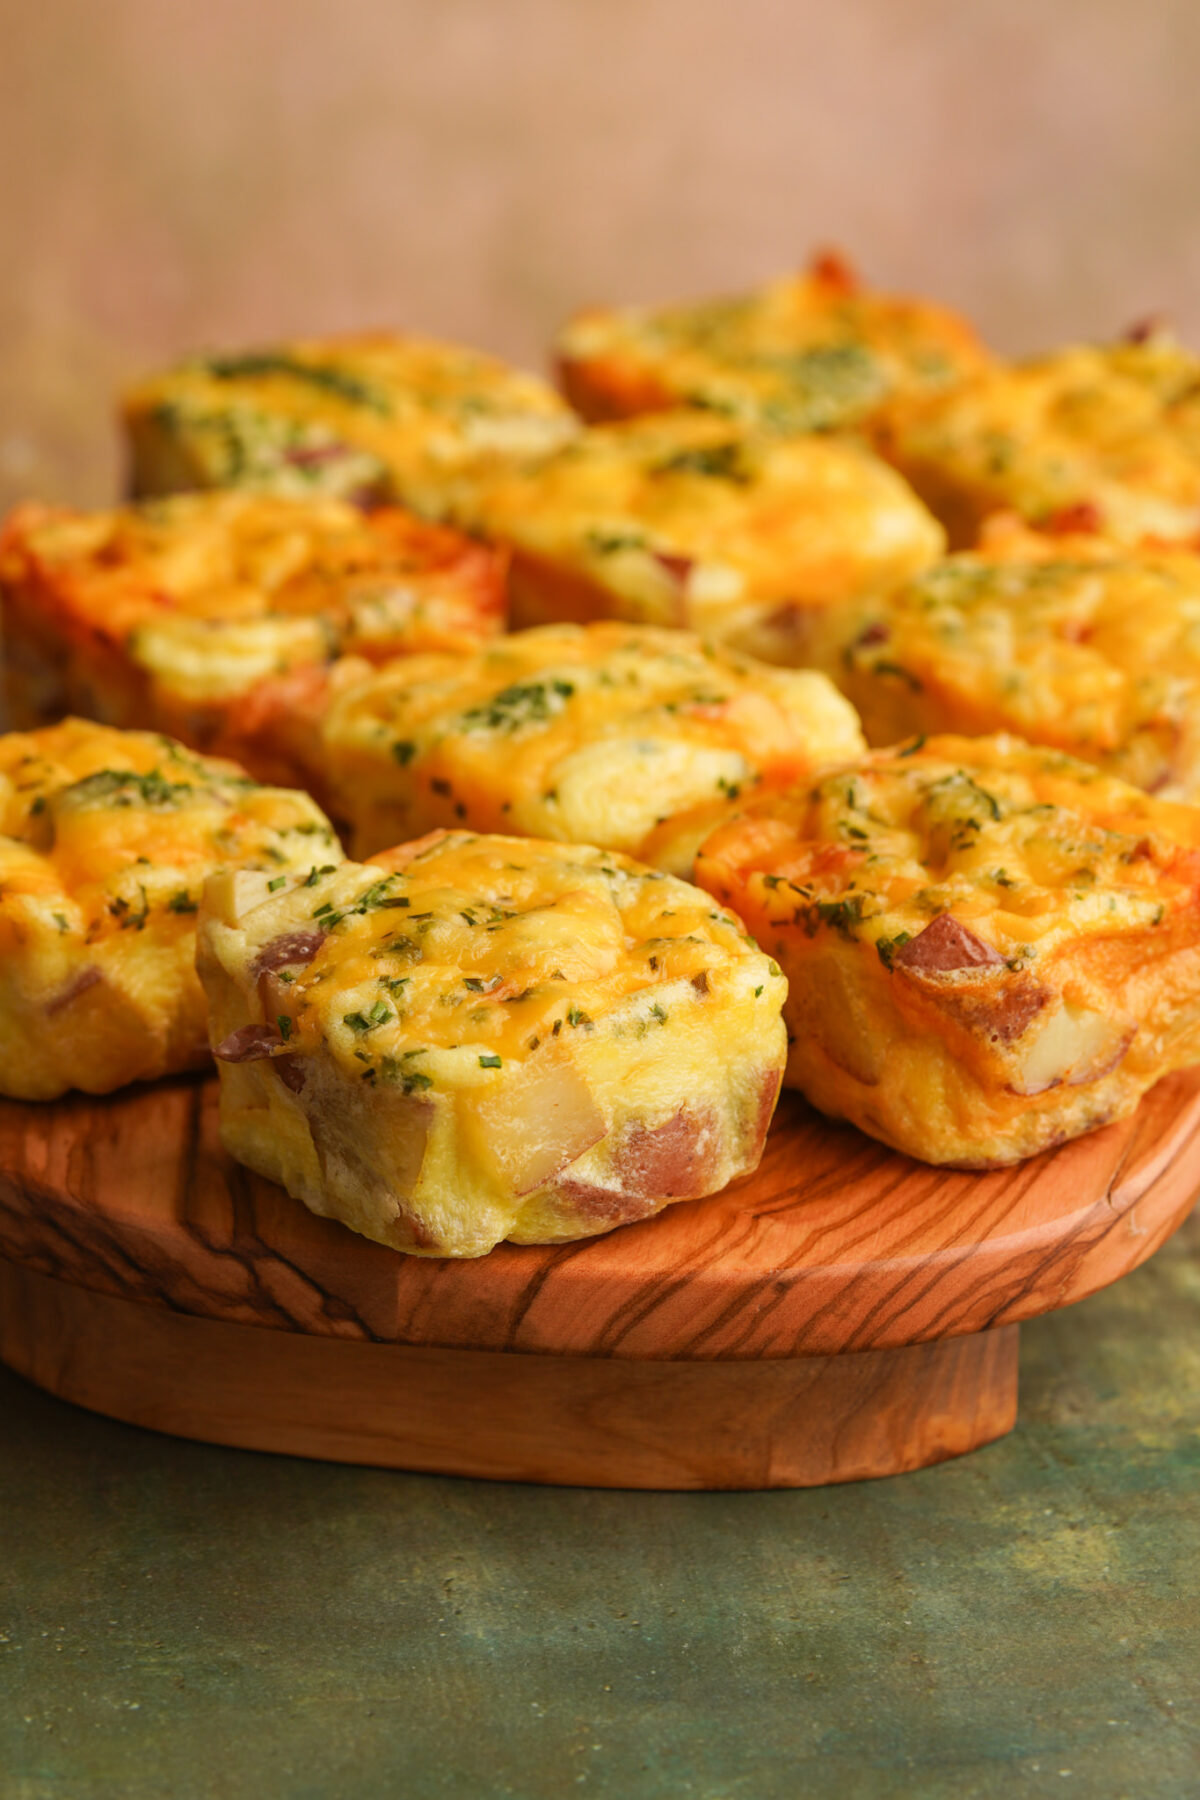 Three quarter view of square potato cheddar and chive egg bakes arranged on a cutting board